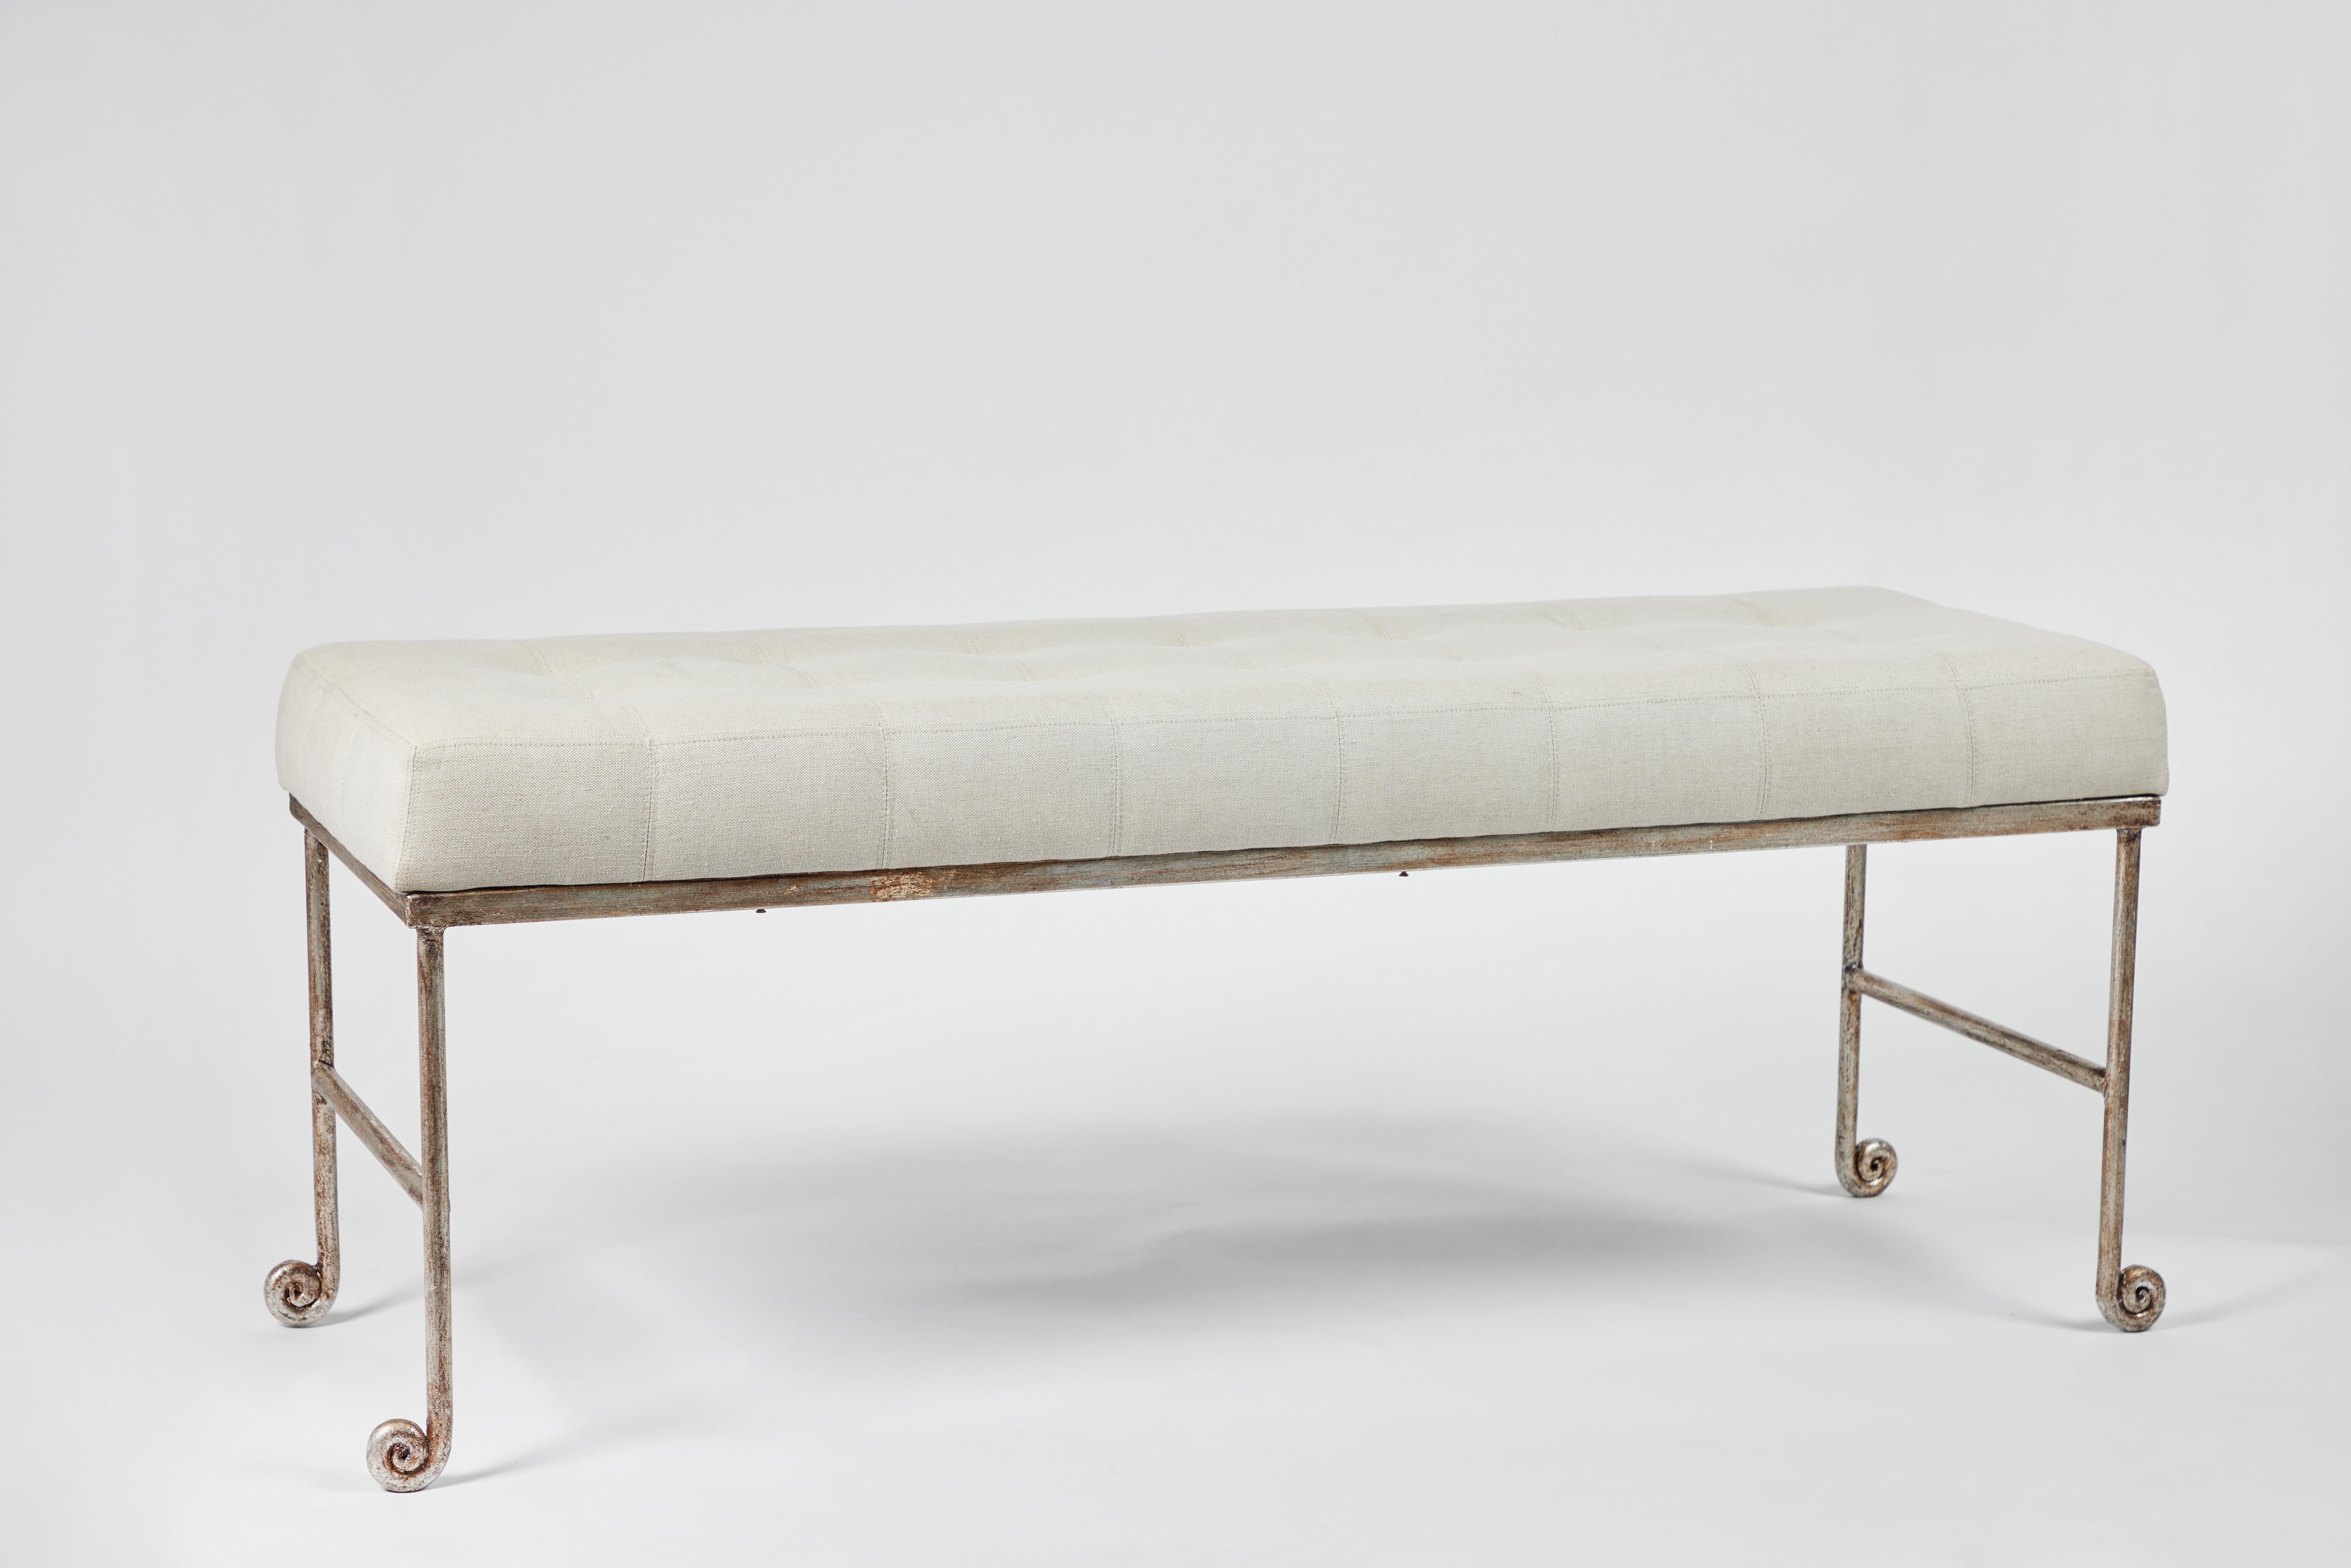 Silvered iron bench with curled feet like a fiddlehead fern. Tufted seat cushion in cream linen. The 